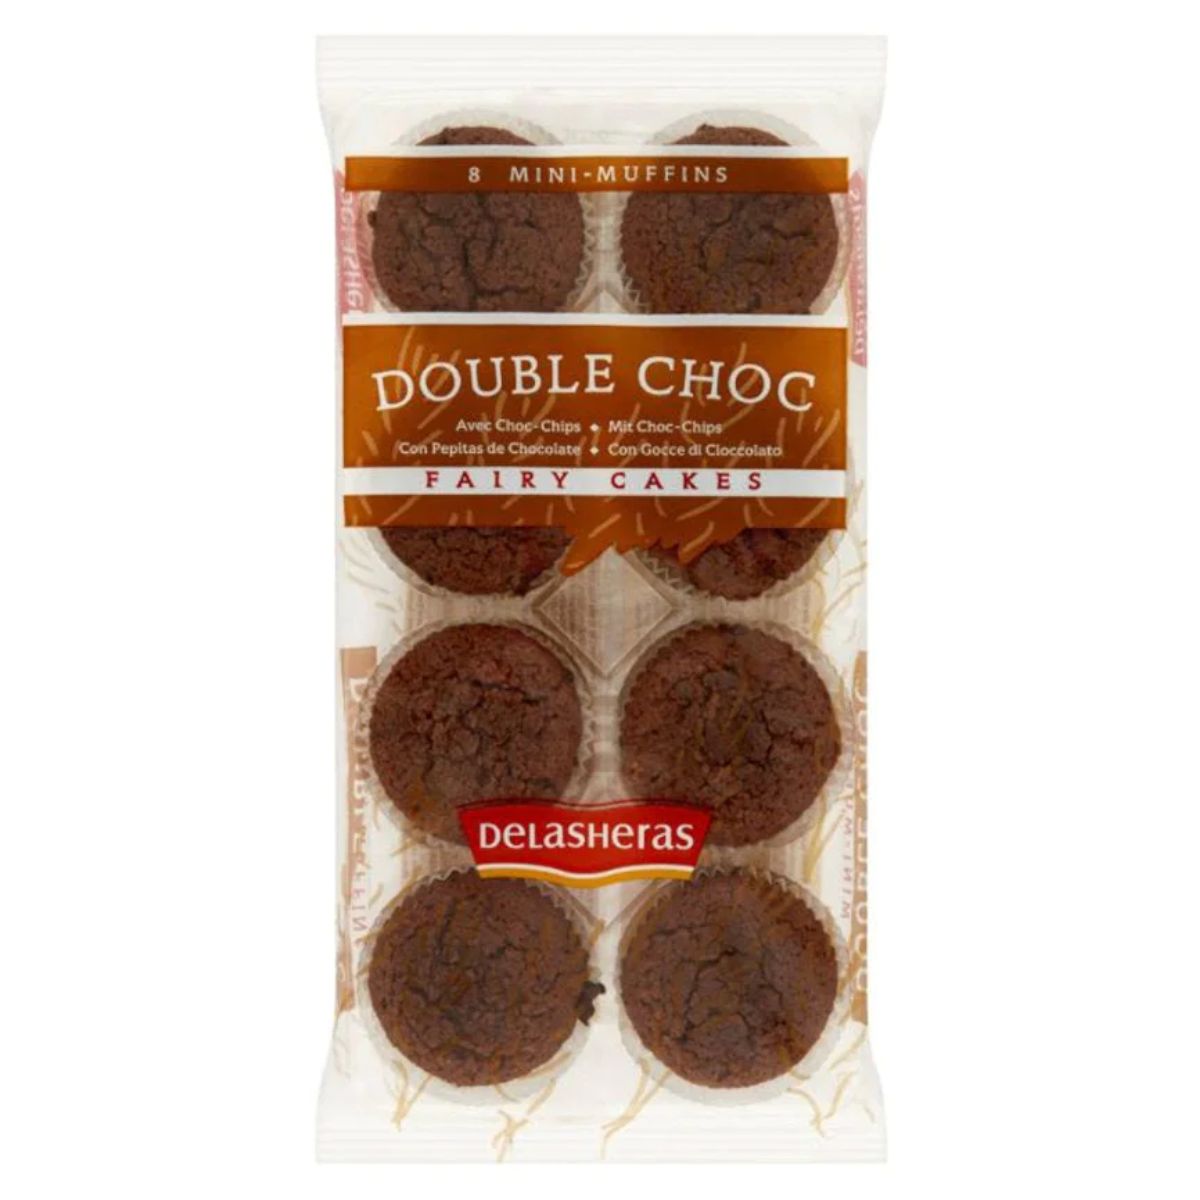 A package of Delasheras - Double Choc Fairy Cakes - 8Pack cupcakes.